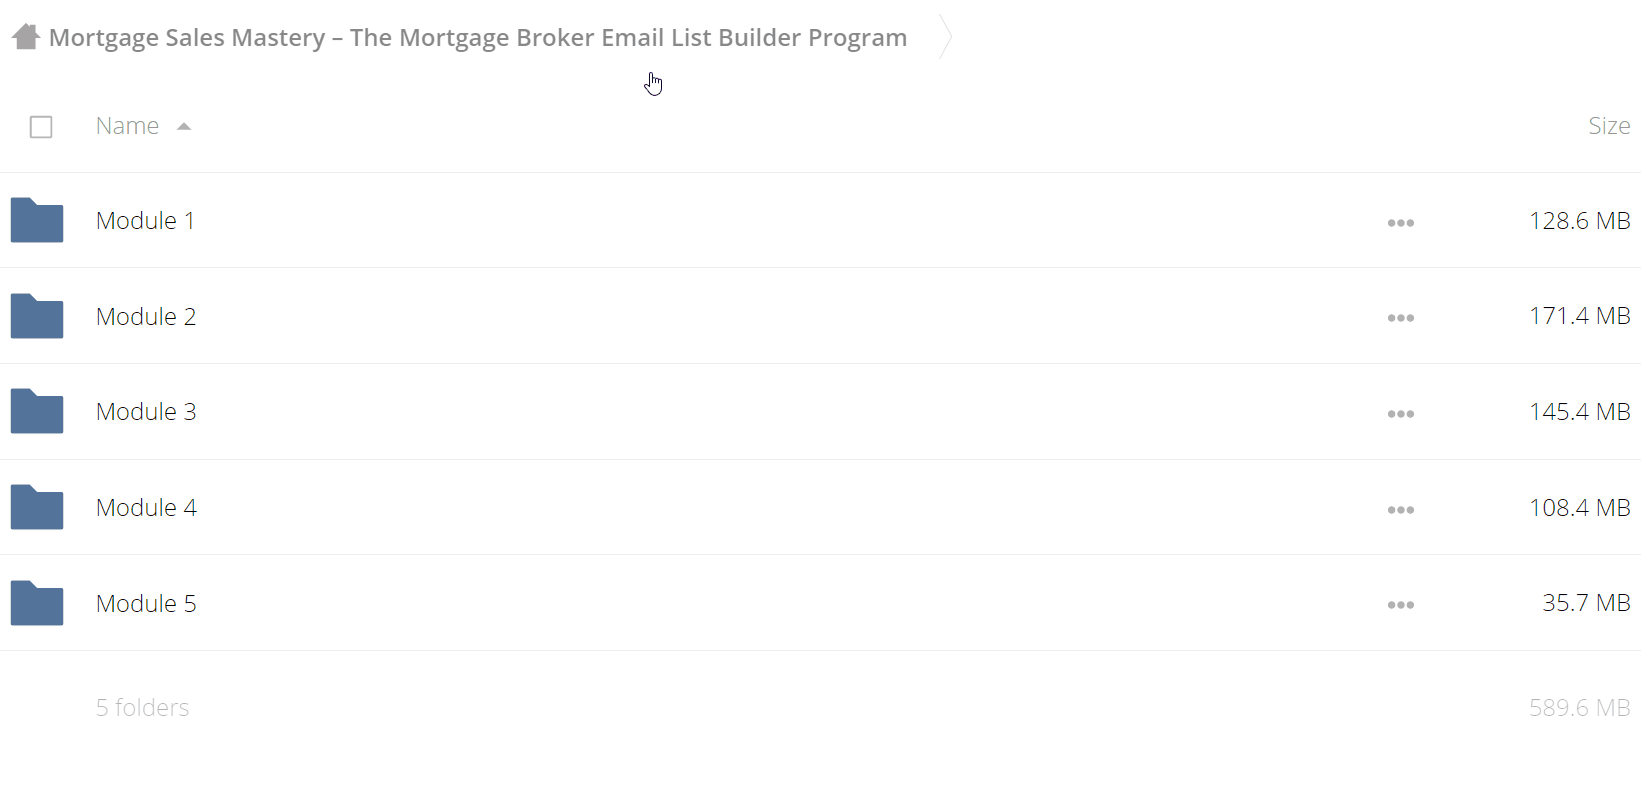 Mortgage Sales Mastery-The Mortgage Broker Email List Builder Program - Mark Blundell